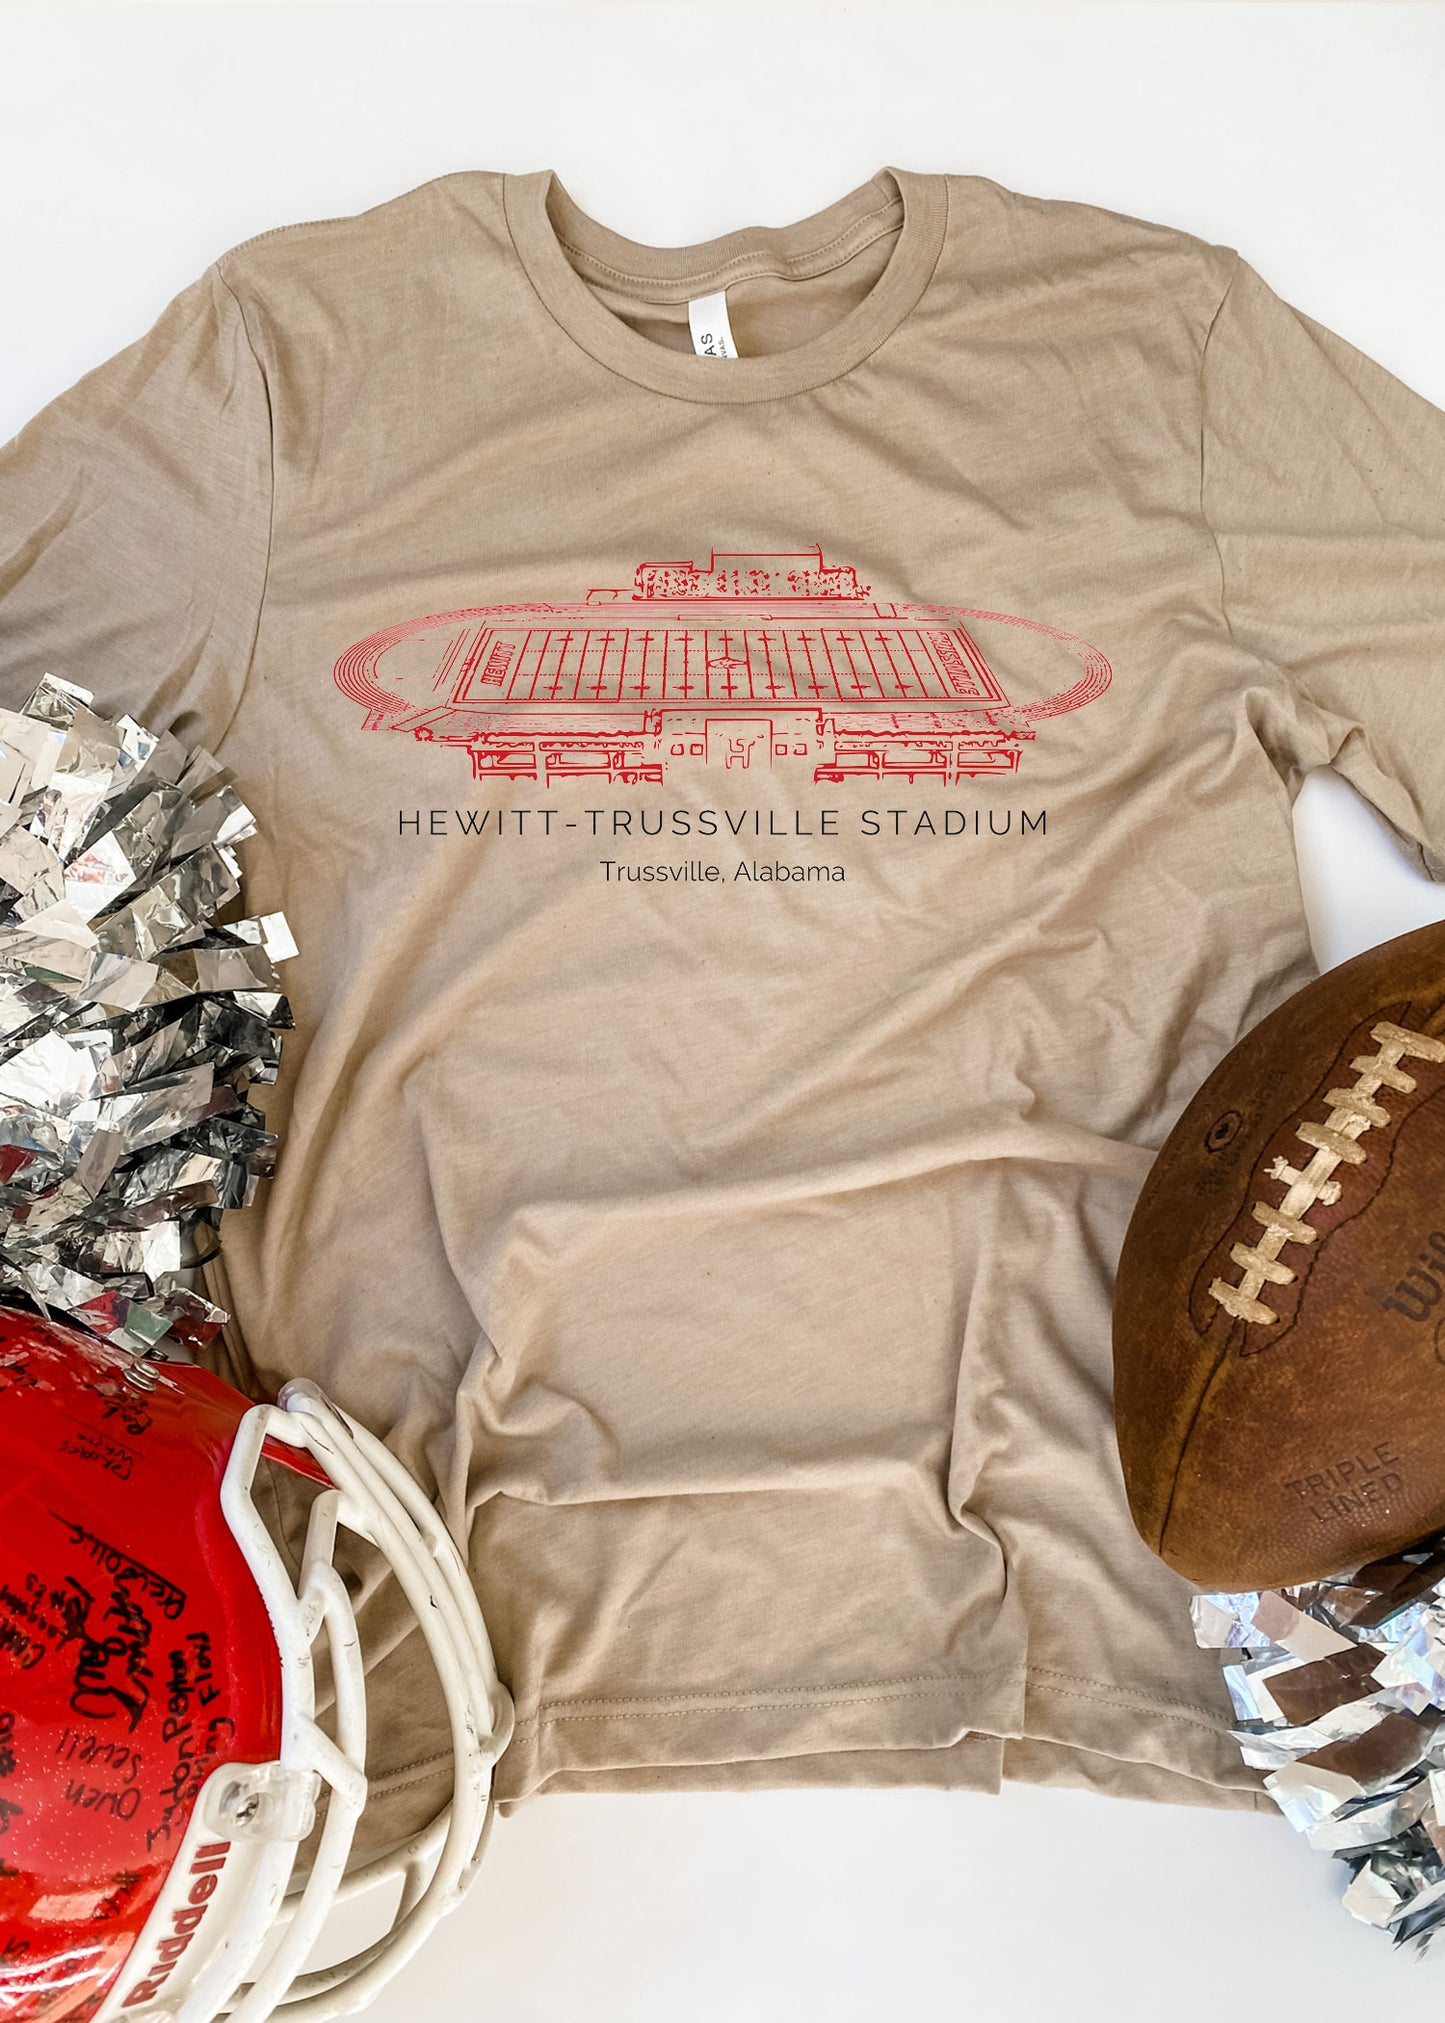 Hewitt Trussville Stadium | Adult Tee-Adult Tee-Sister Shirts-Sister Shirts, Cute & Custom Tees for Mama & Littles in Trussville, Alabama.